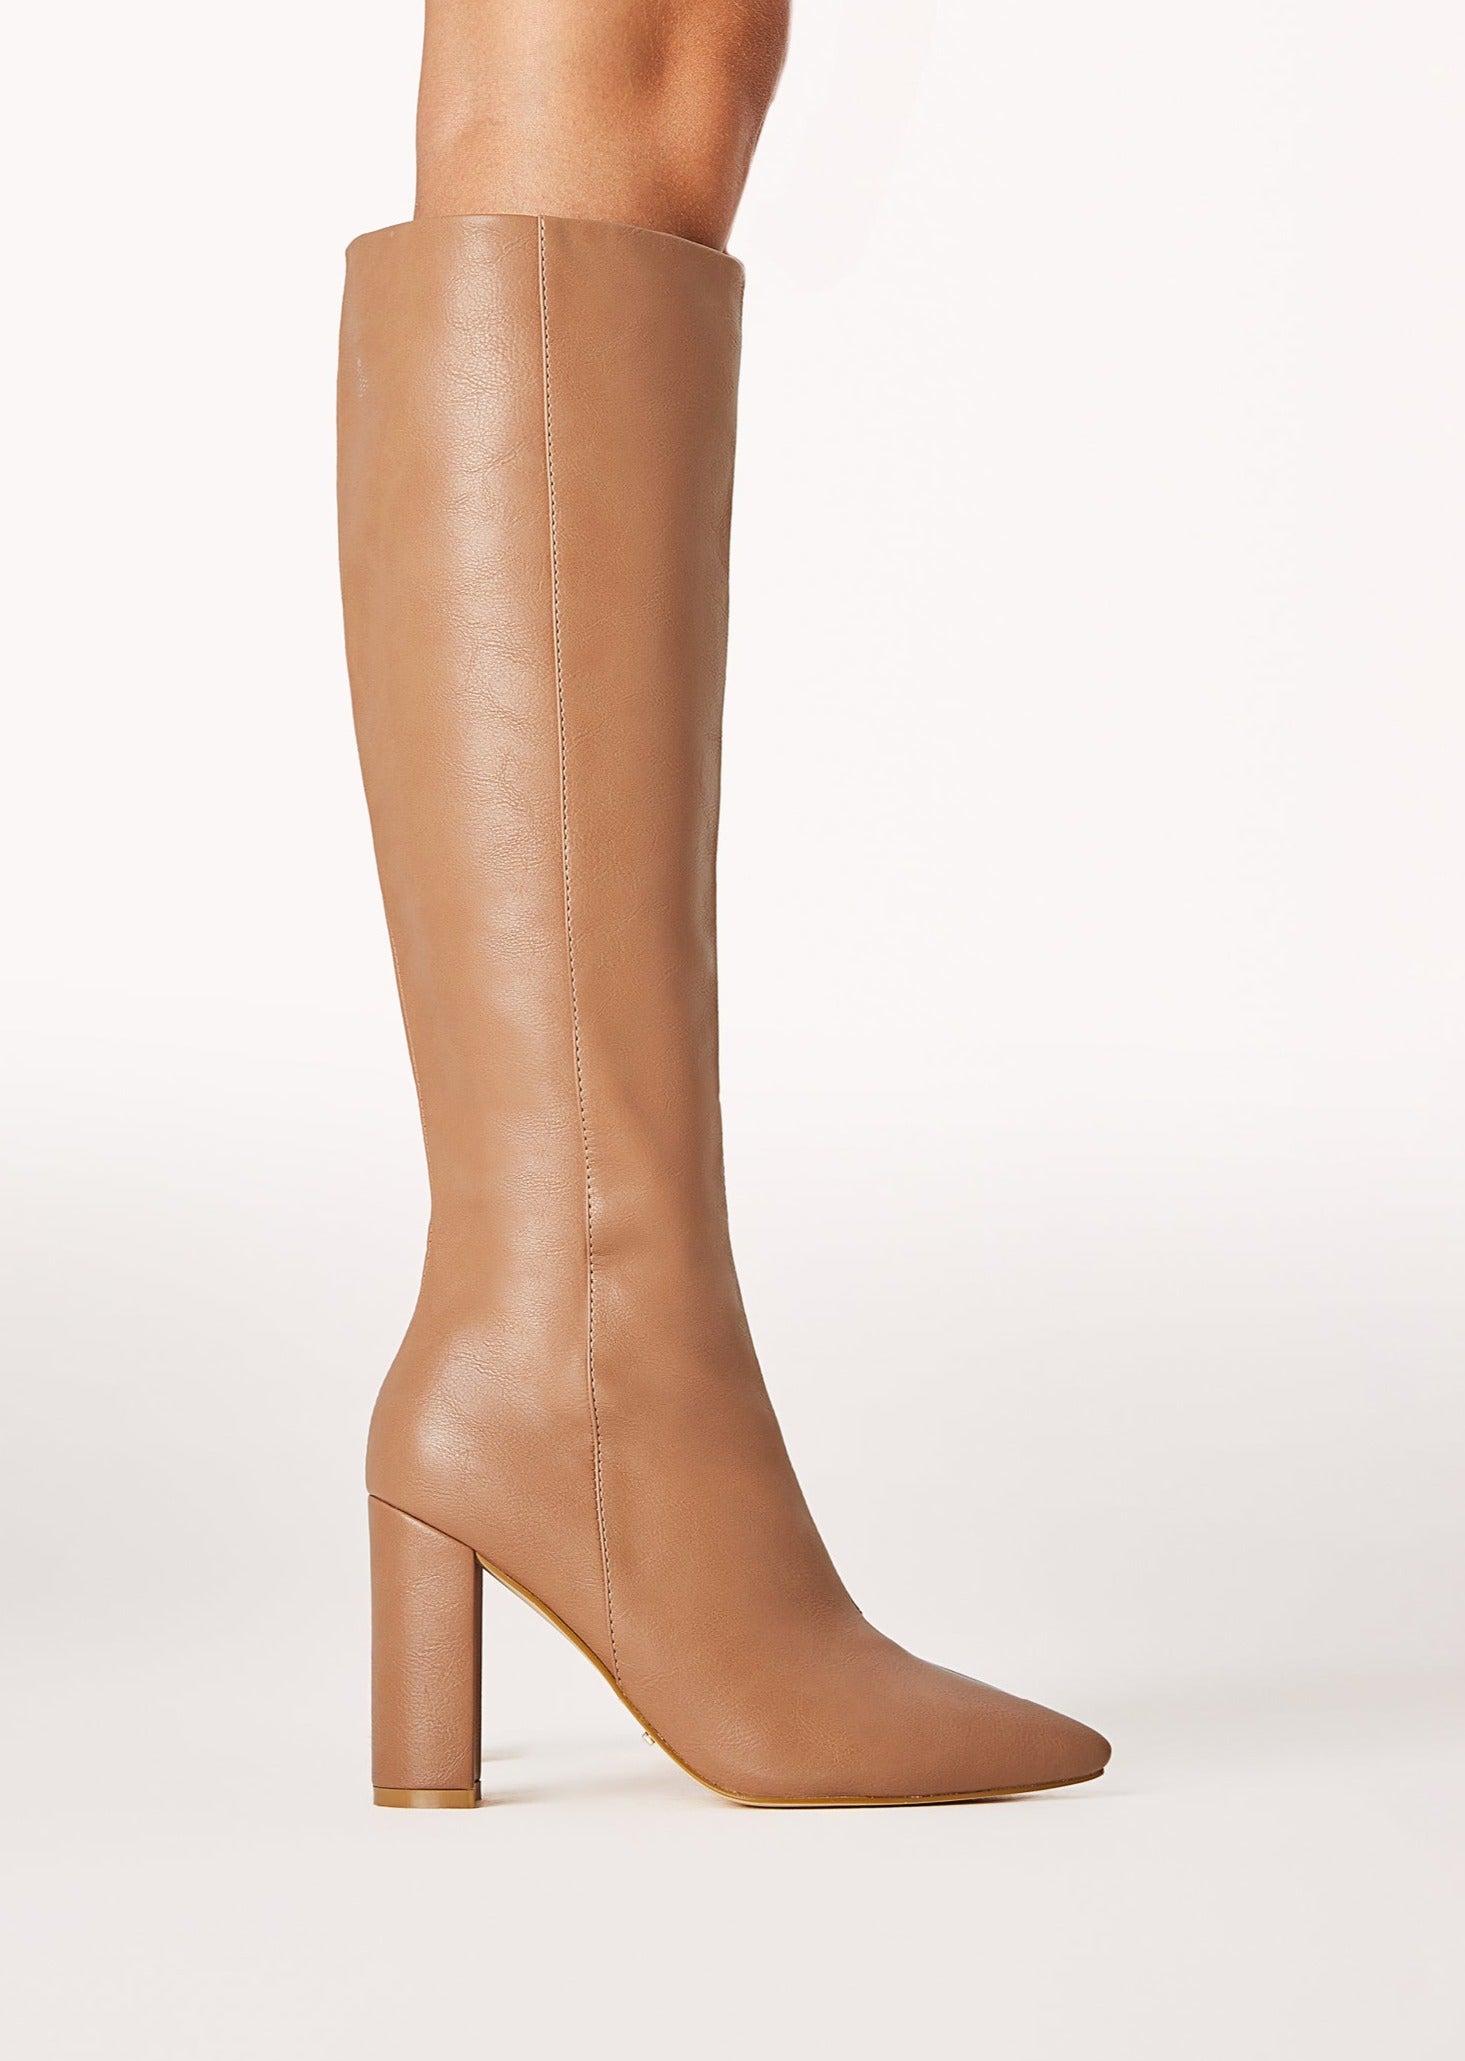 Gibson Knee High Boots - Toffee Texture